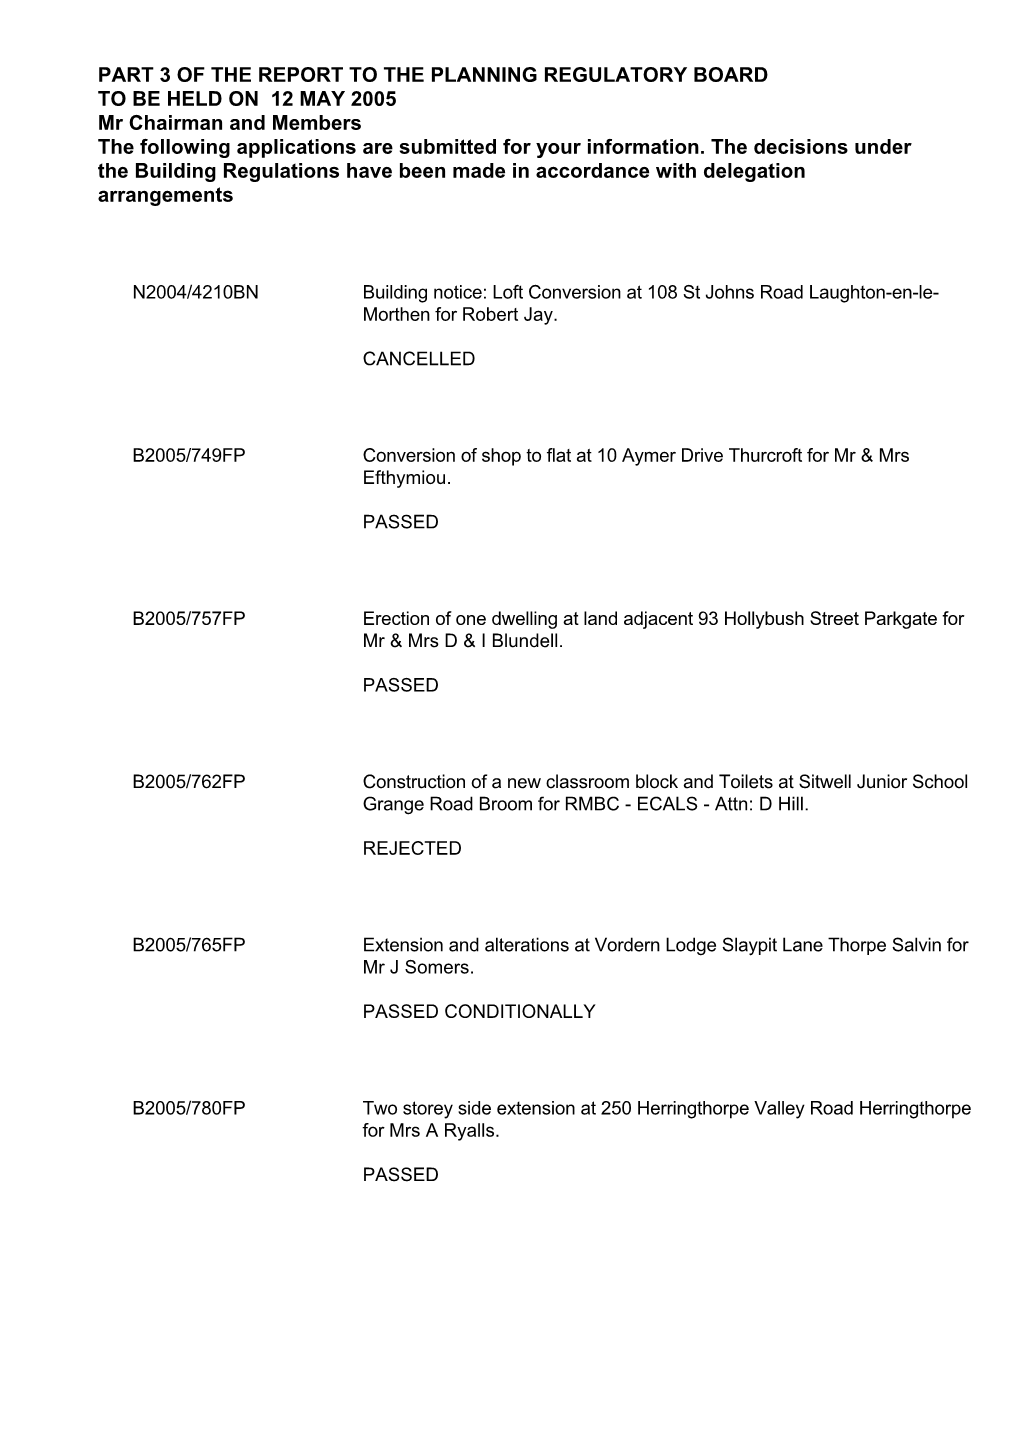 PART 3 of the REPORT to the PLANNING REGULATORY BOARD to BE HELD on 12 MAY 2005 Mr Chairman and Members the Following Applications Are Submitted for Your Information